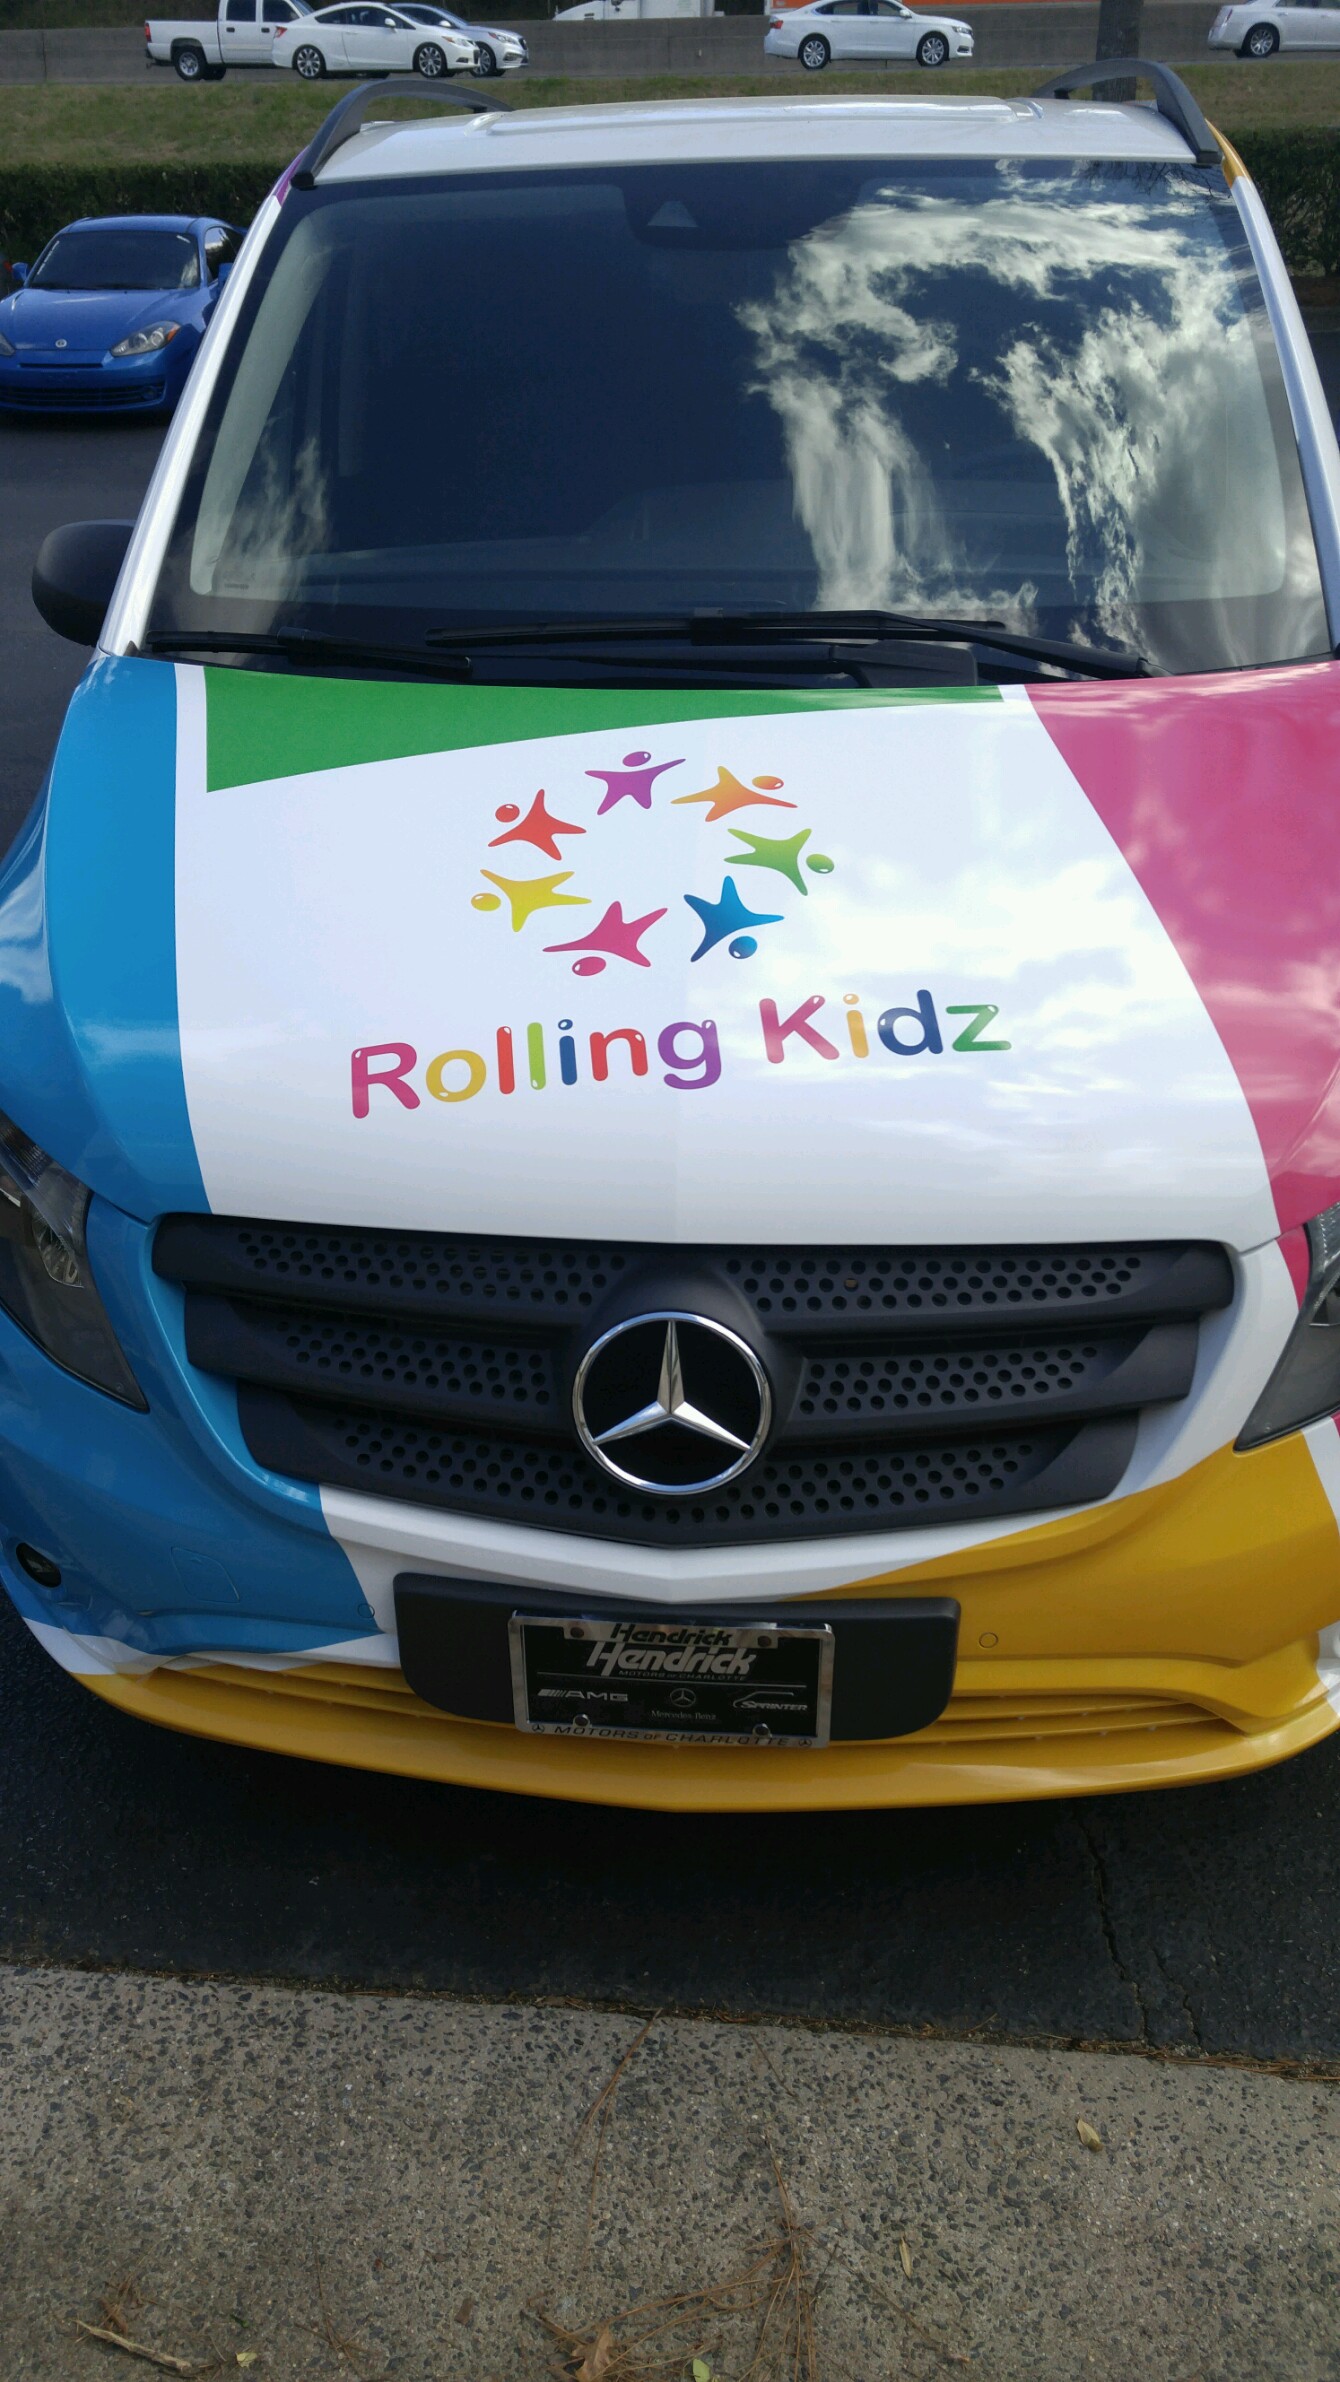 Rolling Kidz Open for Business